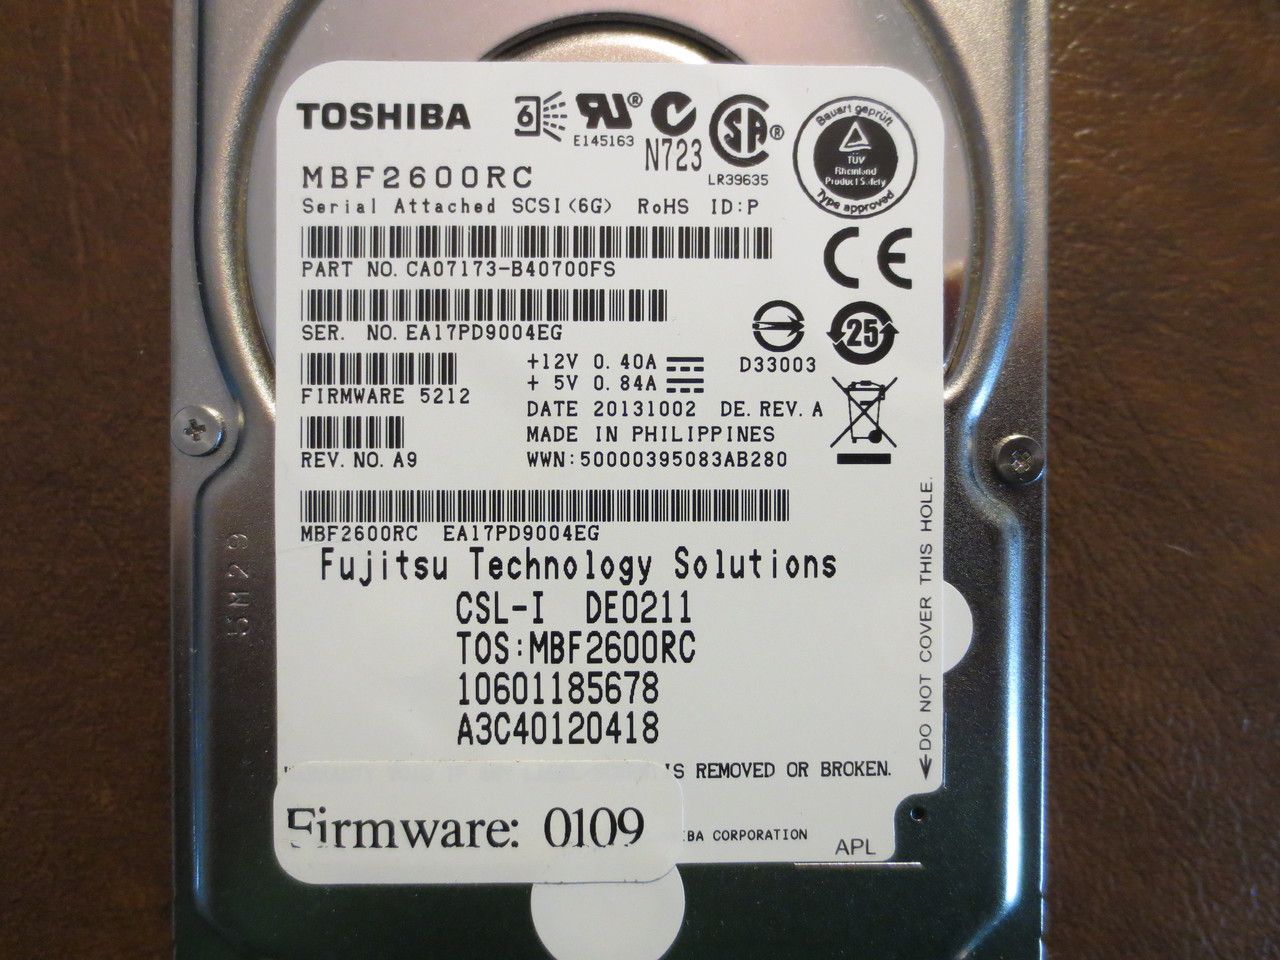 toshiba serial number